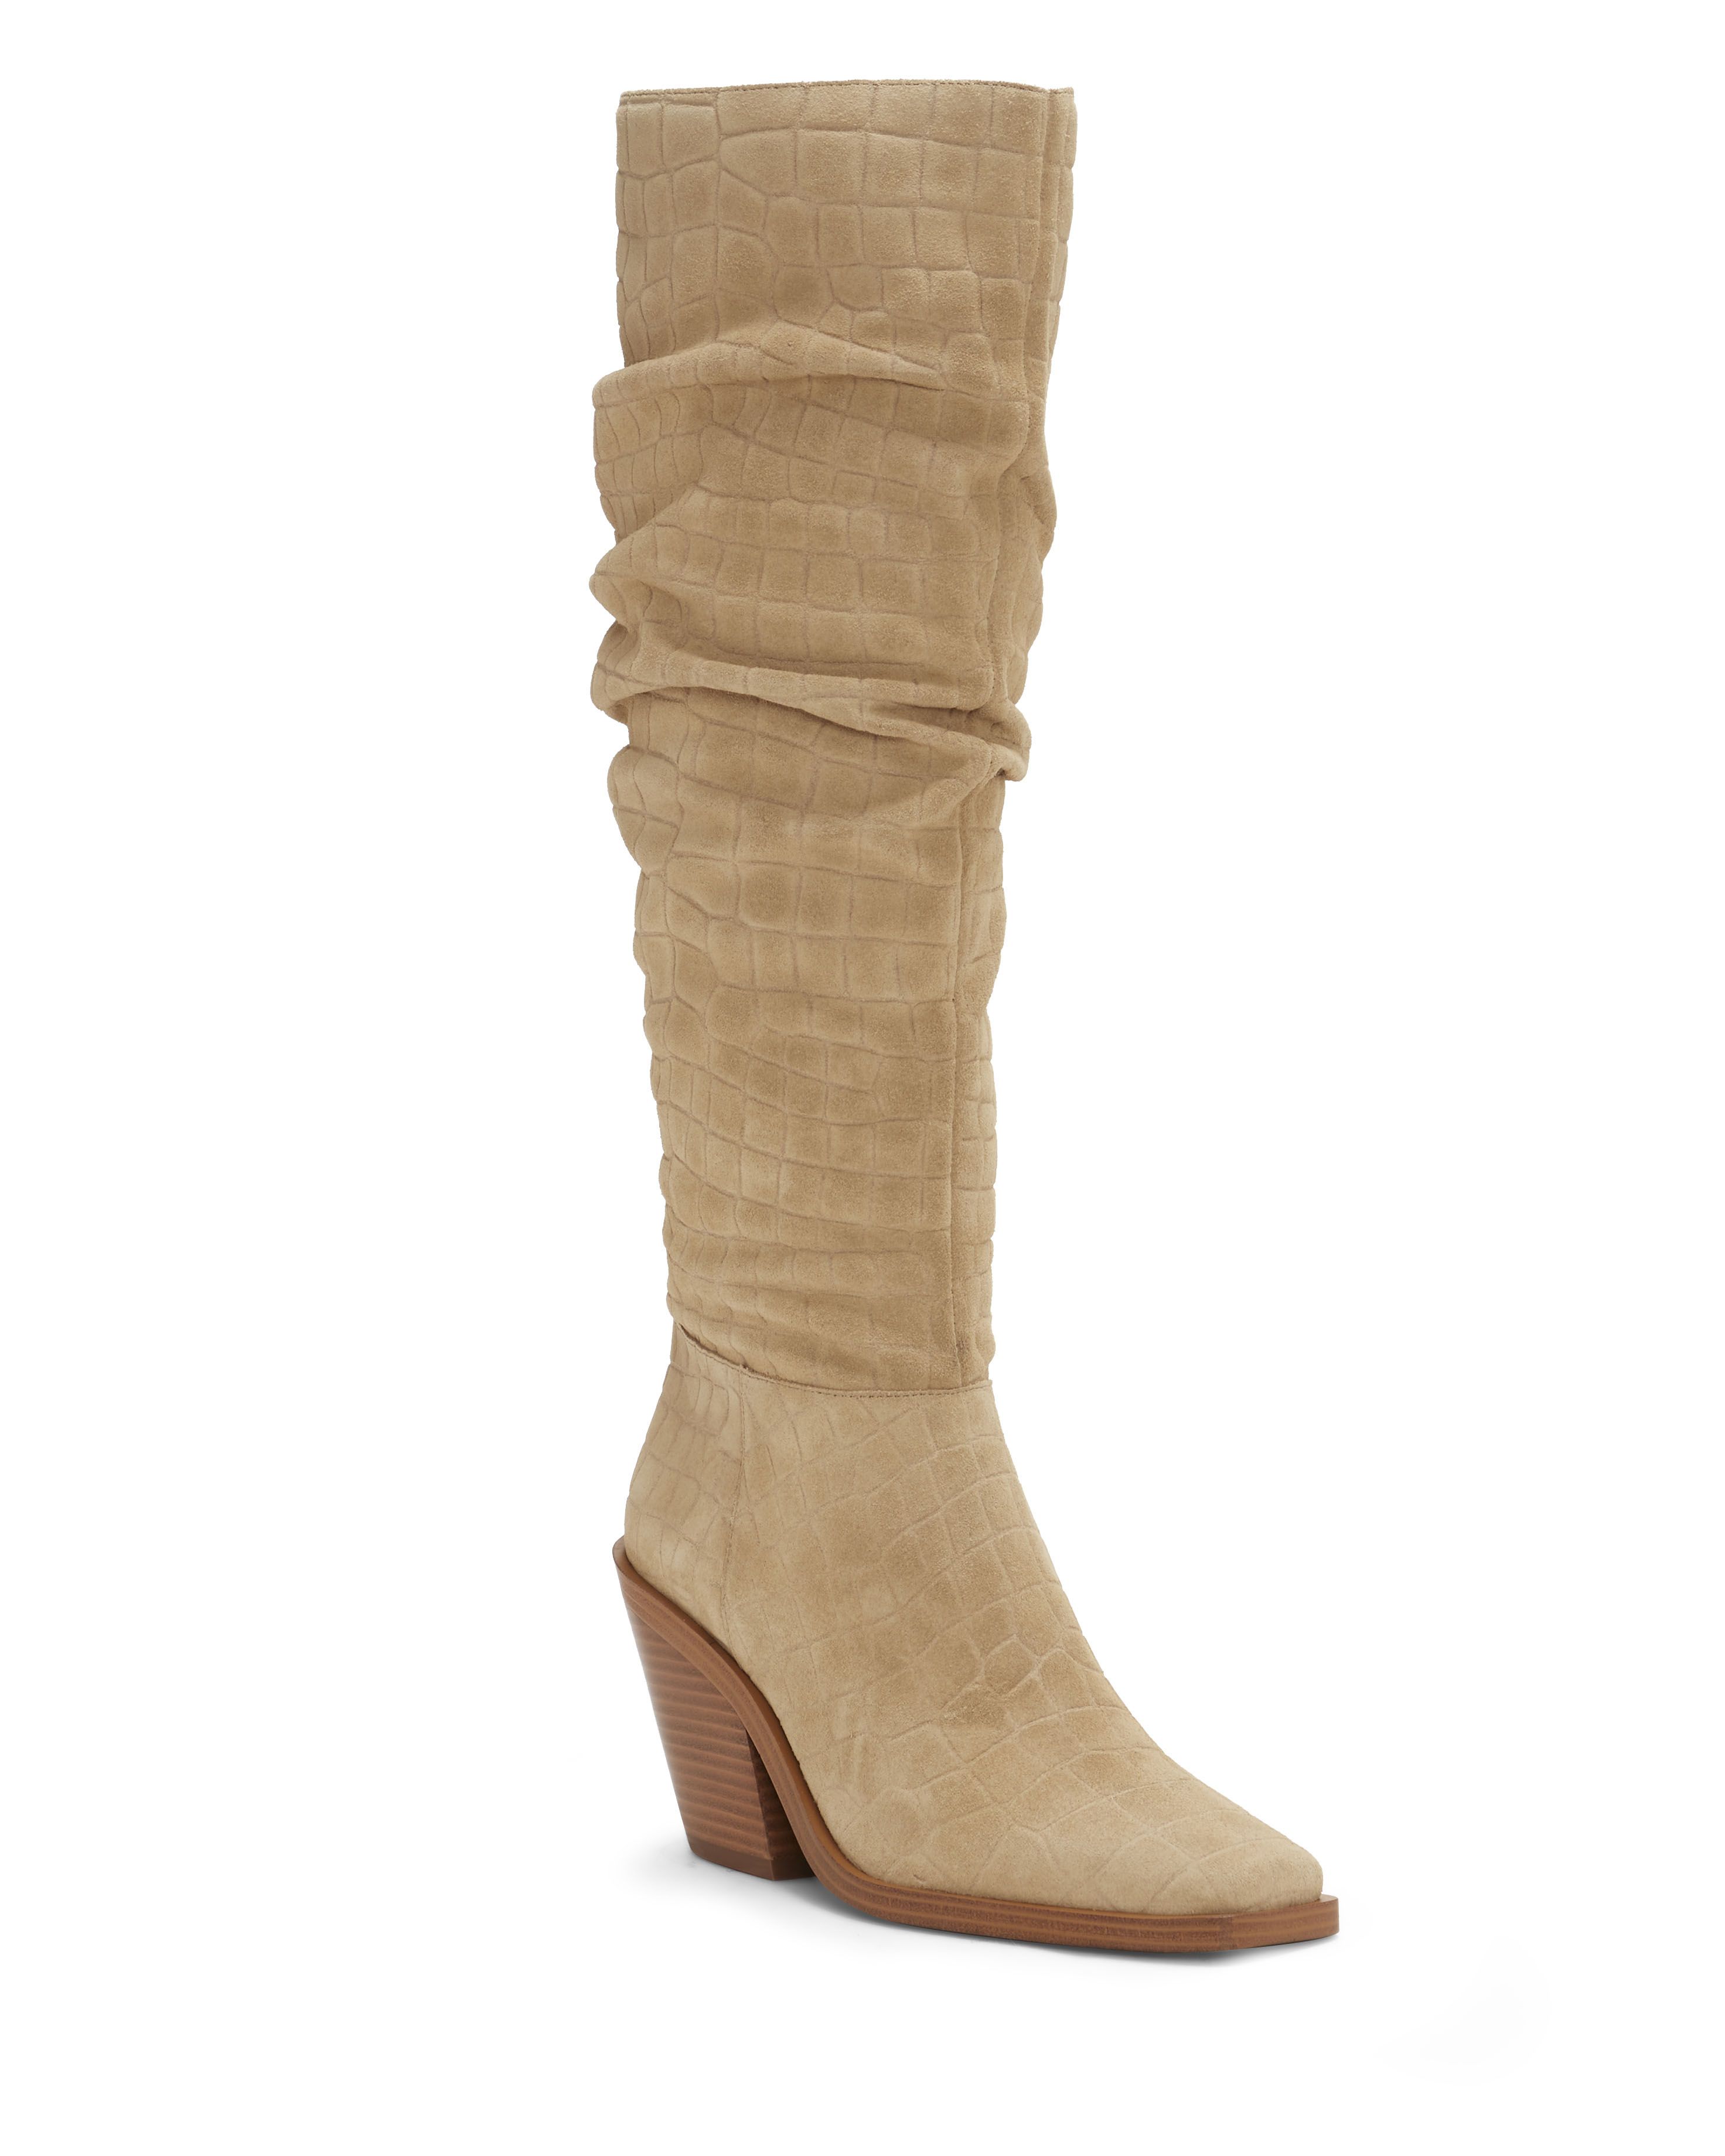 Alimber Slouchy Boot | Vince Camuto